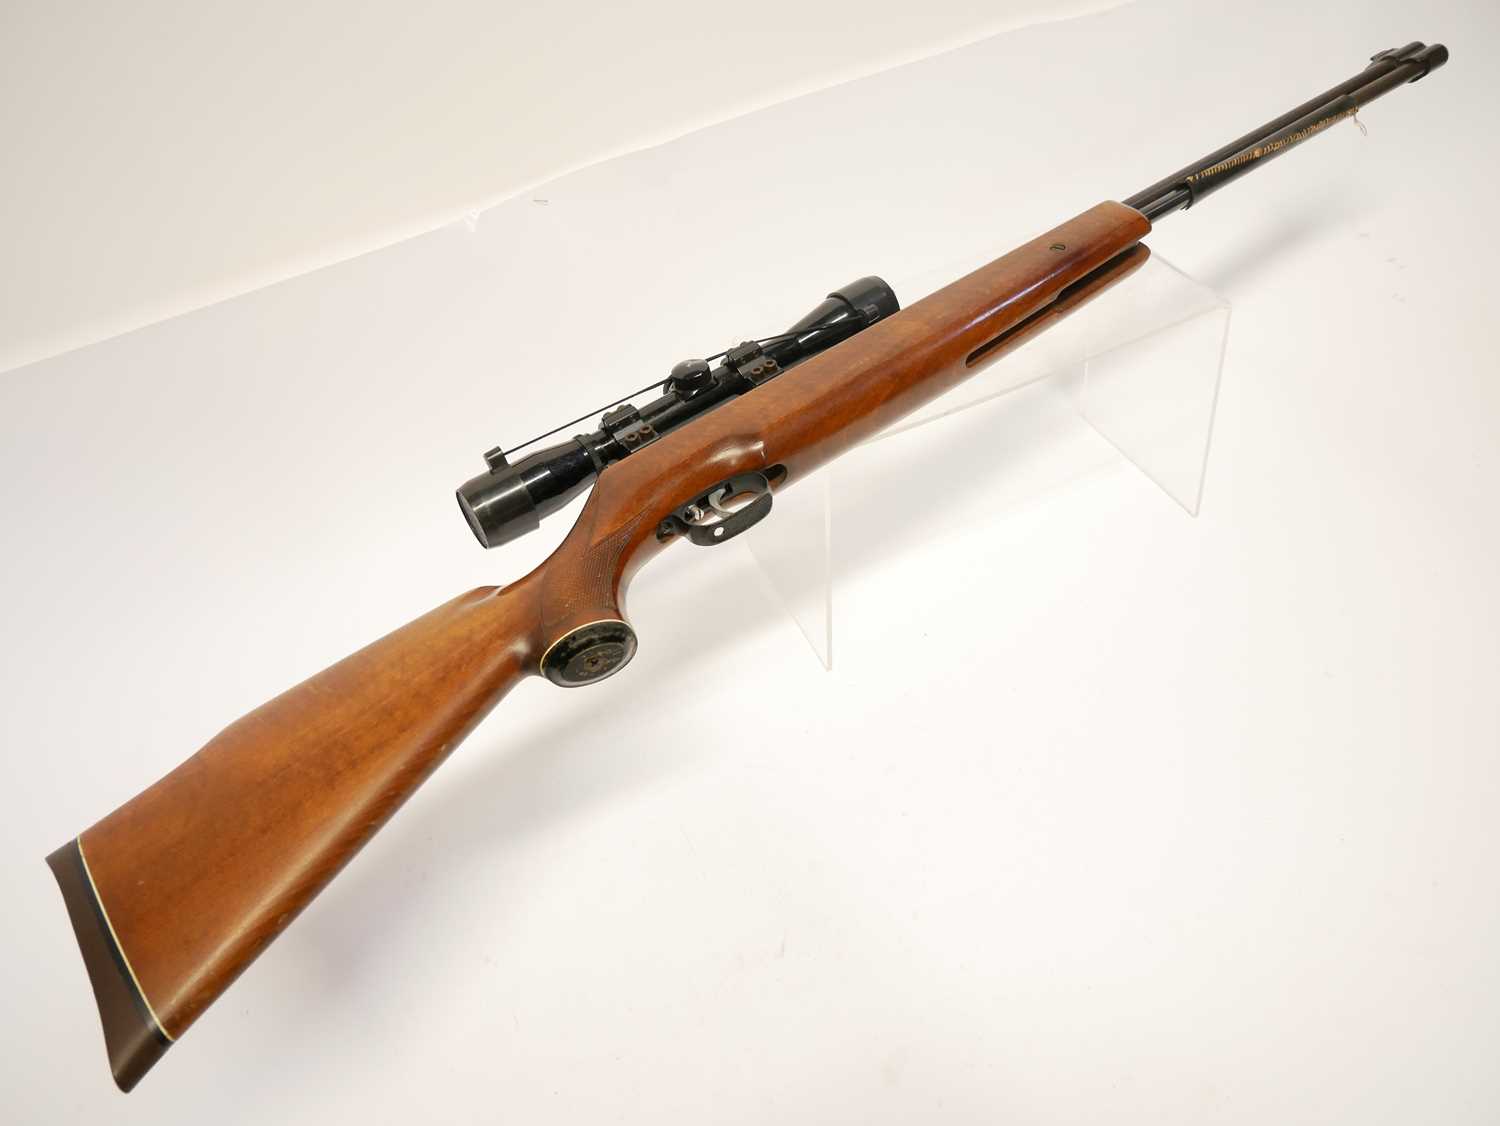 Weihrauch HW77 .22 air rifle serial number 1002371, 18 inch barrel, with Apollo 4x32 scope and a - Image 8 of 10